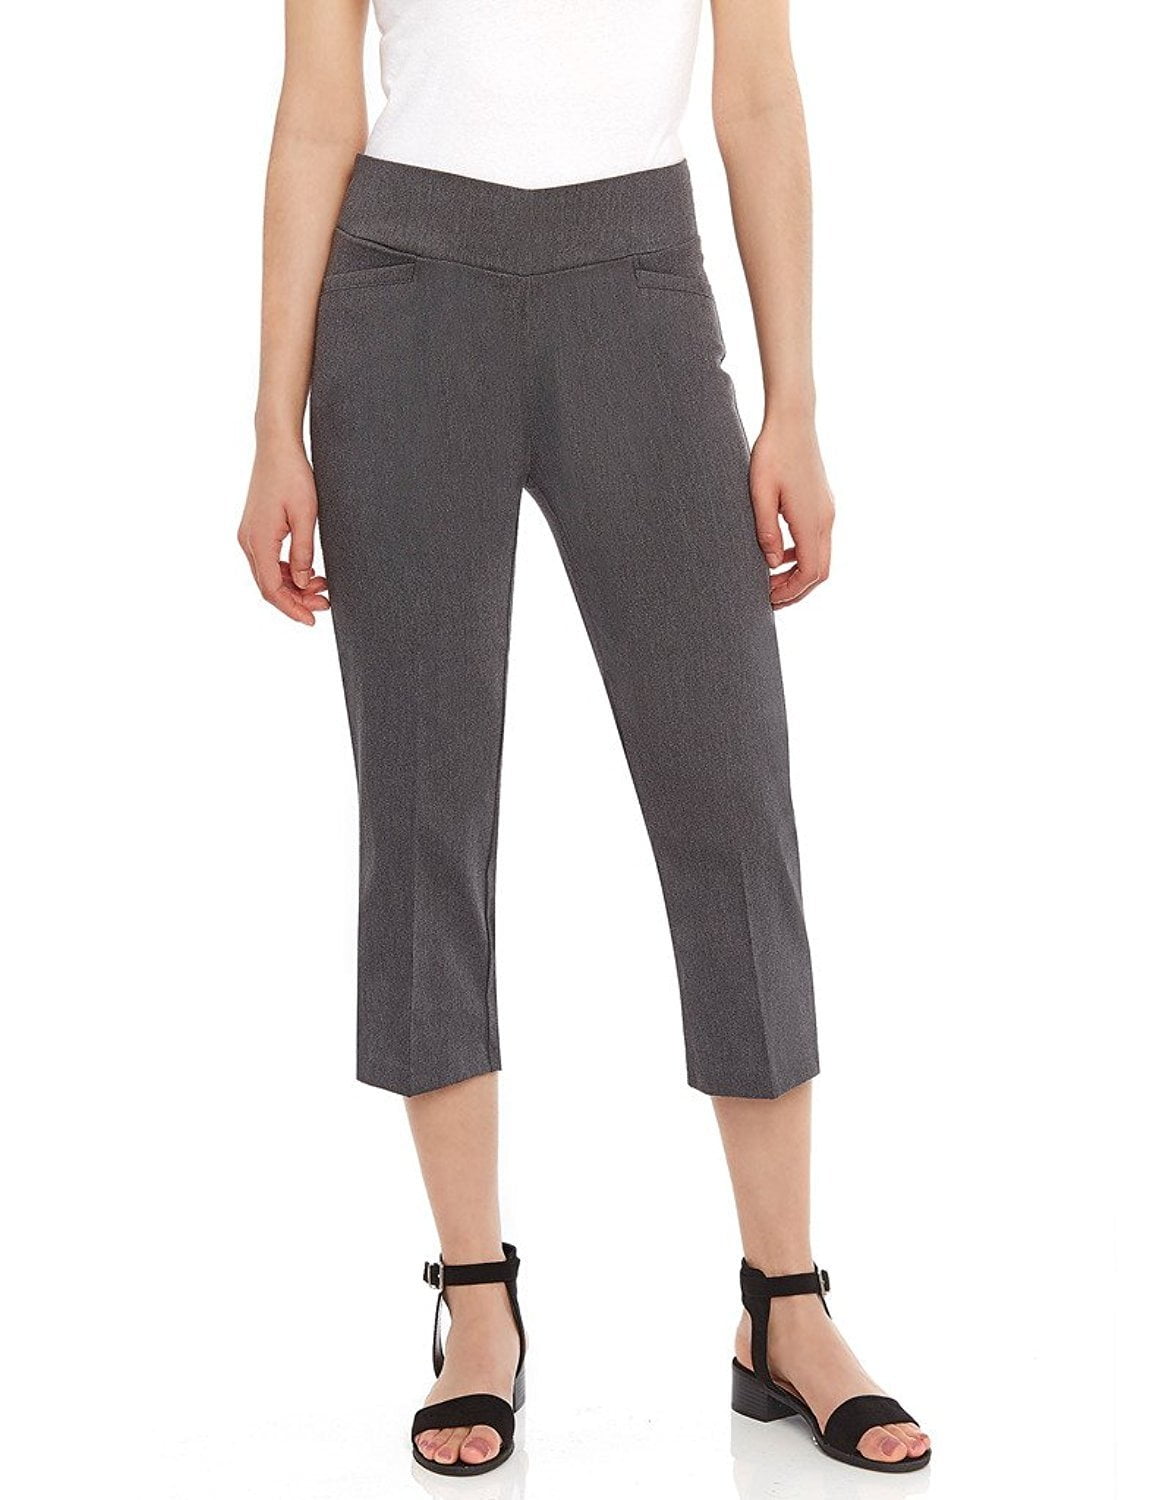 Buy > comfy dress pants womens > in stock